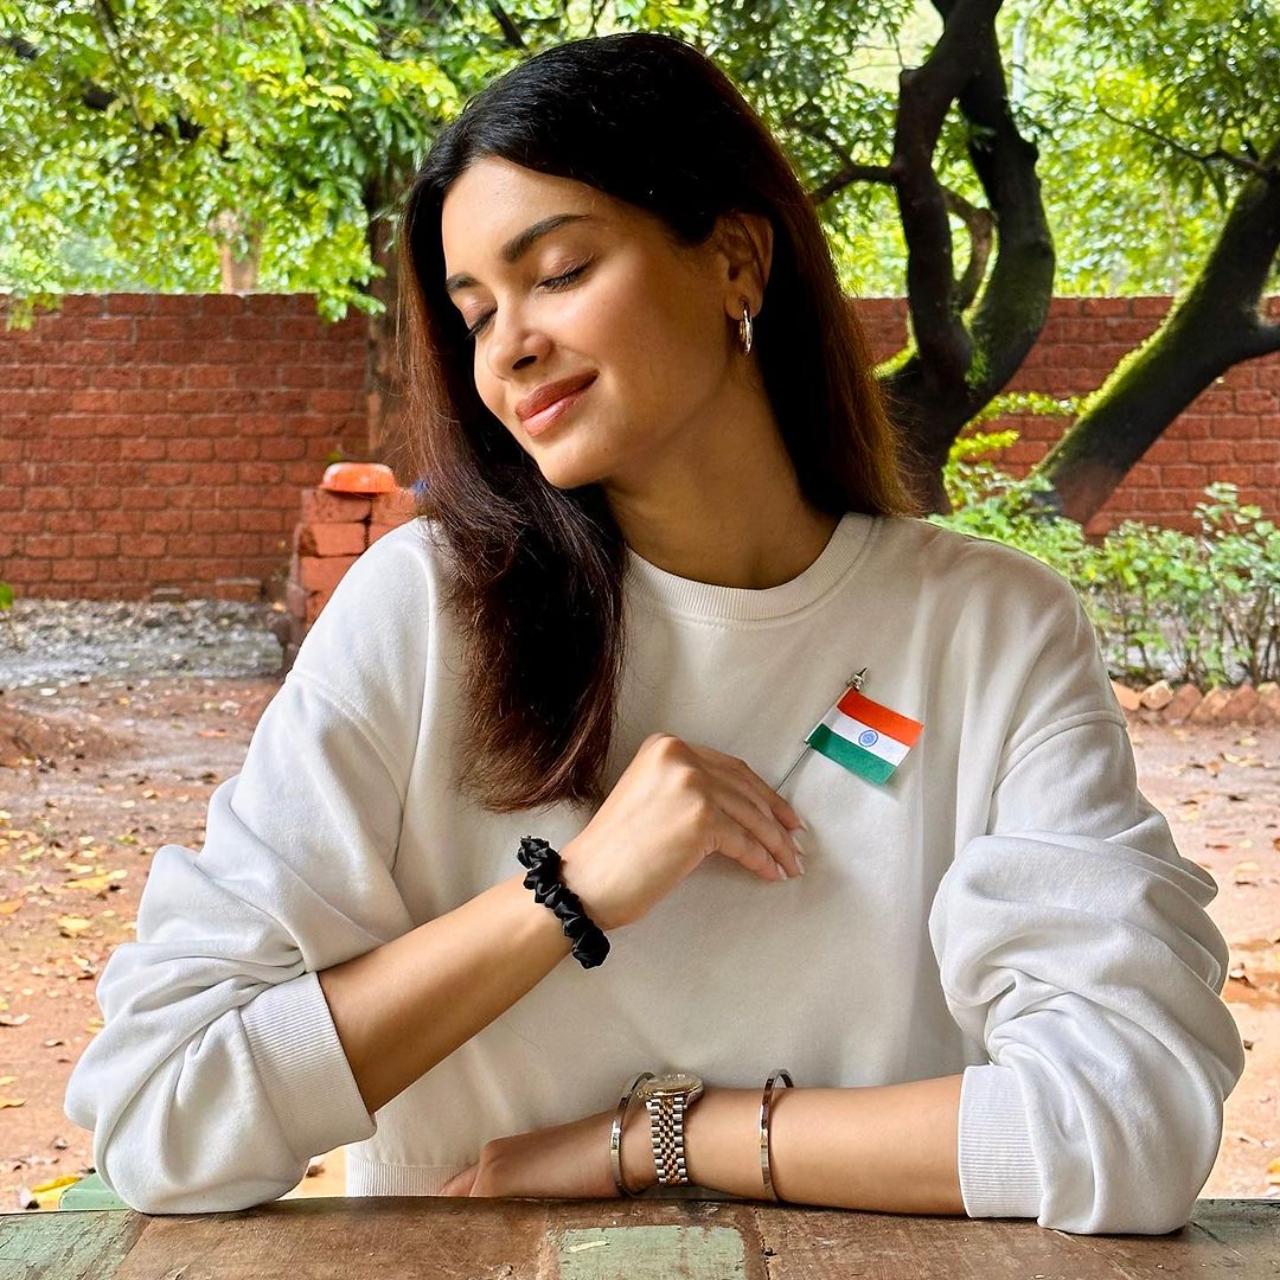 Diana Penty marks the day holding a flag badge close to her heart